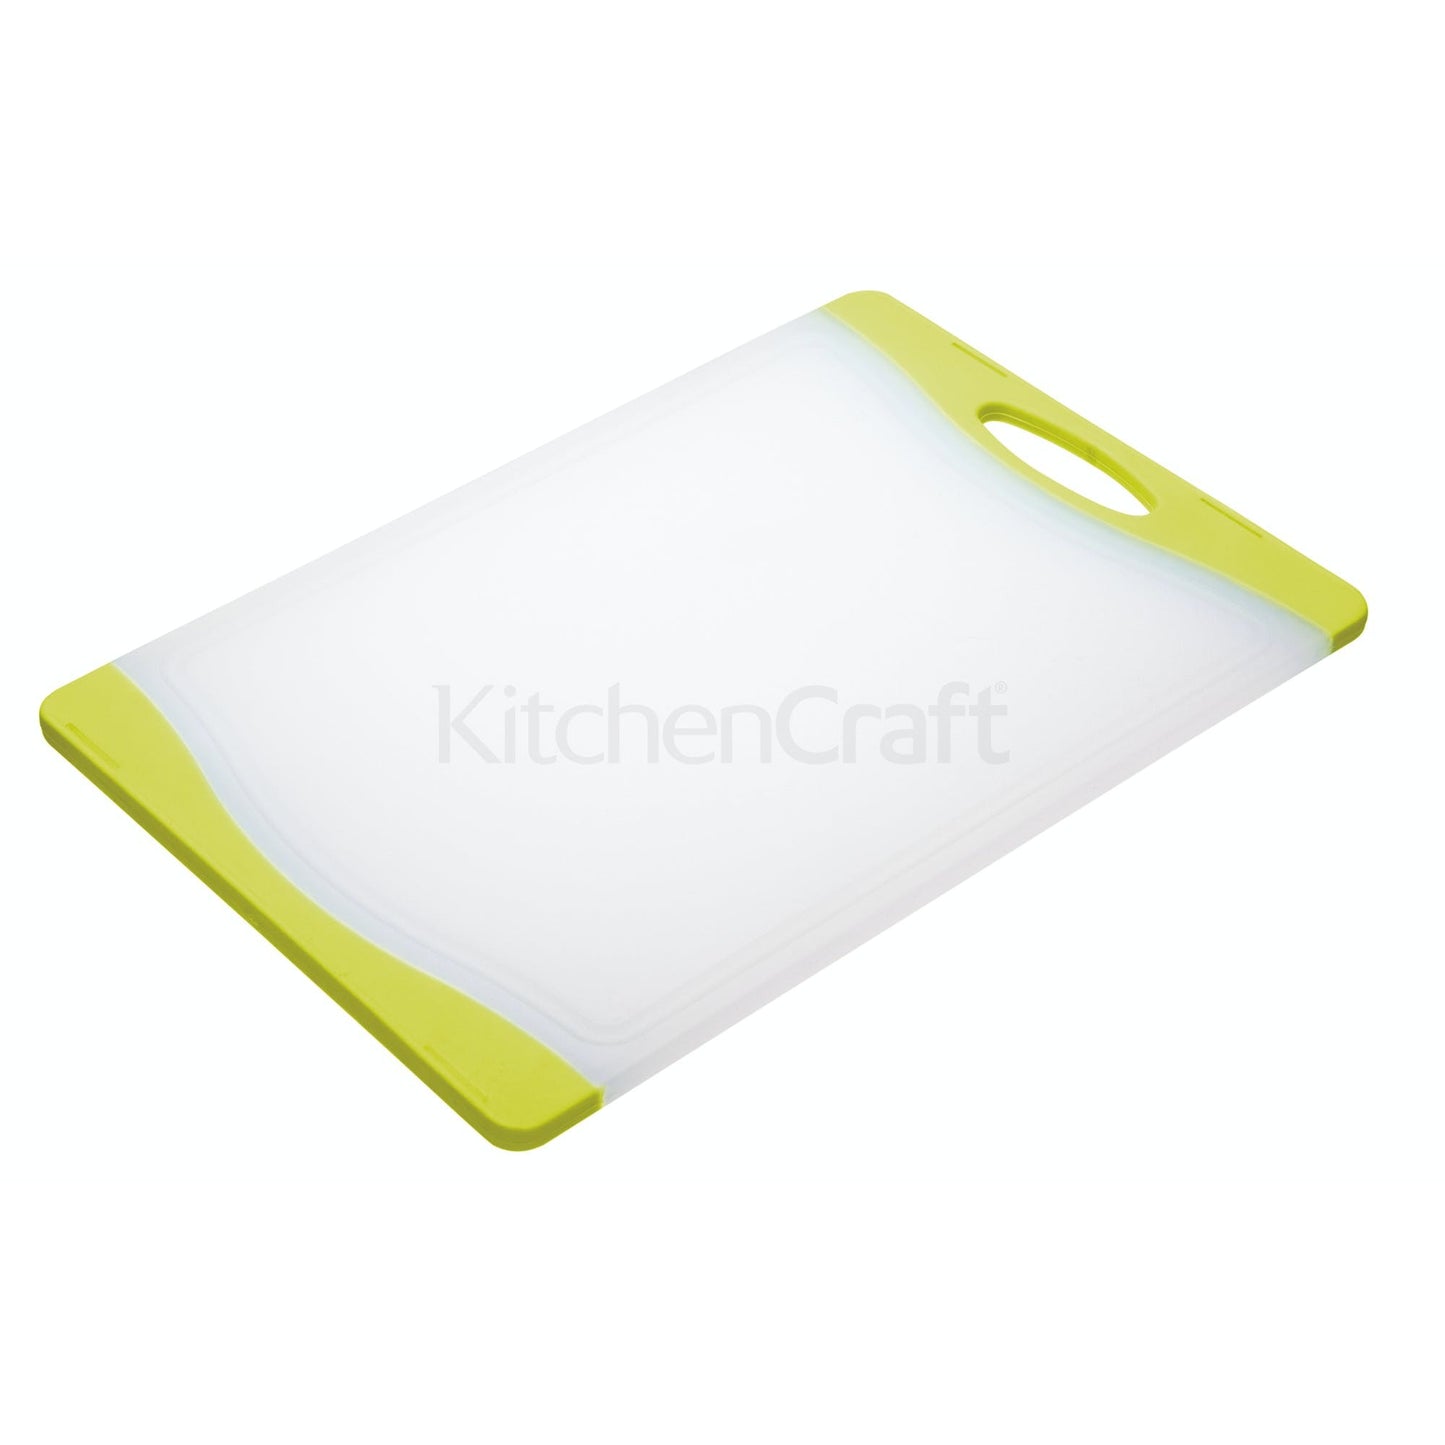 KitchenCraft Colourworks Green Reversible Chopping Board CWBOARD350GRN - Home & Beyond